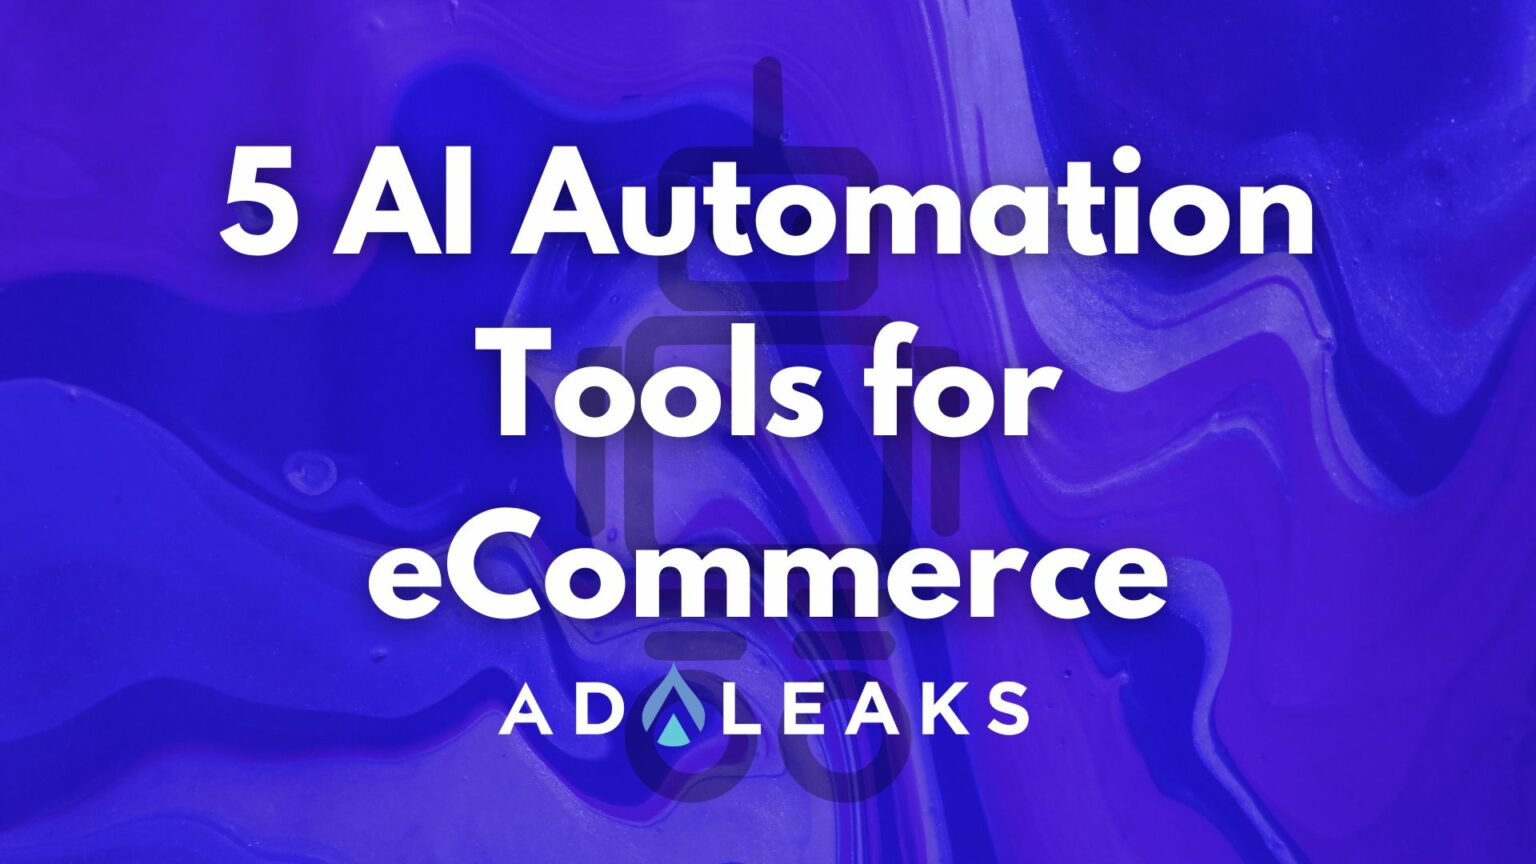 5 AI Automation Tools for eCommerce